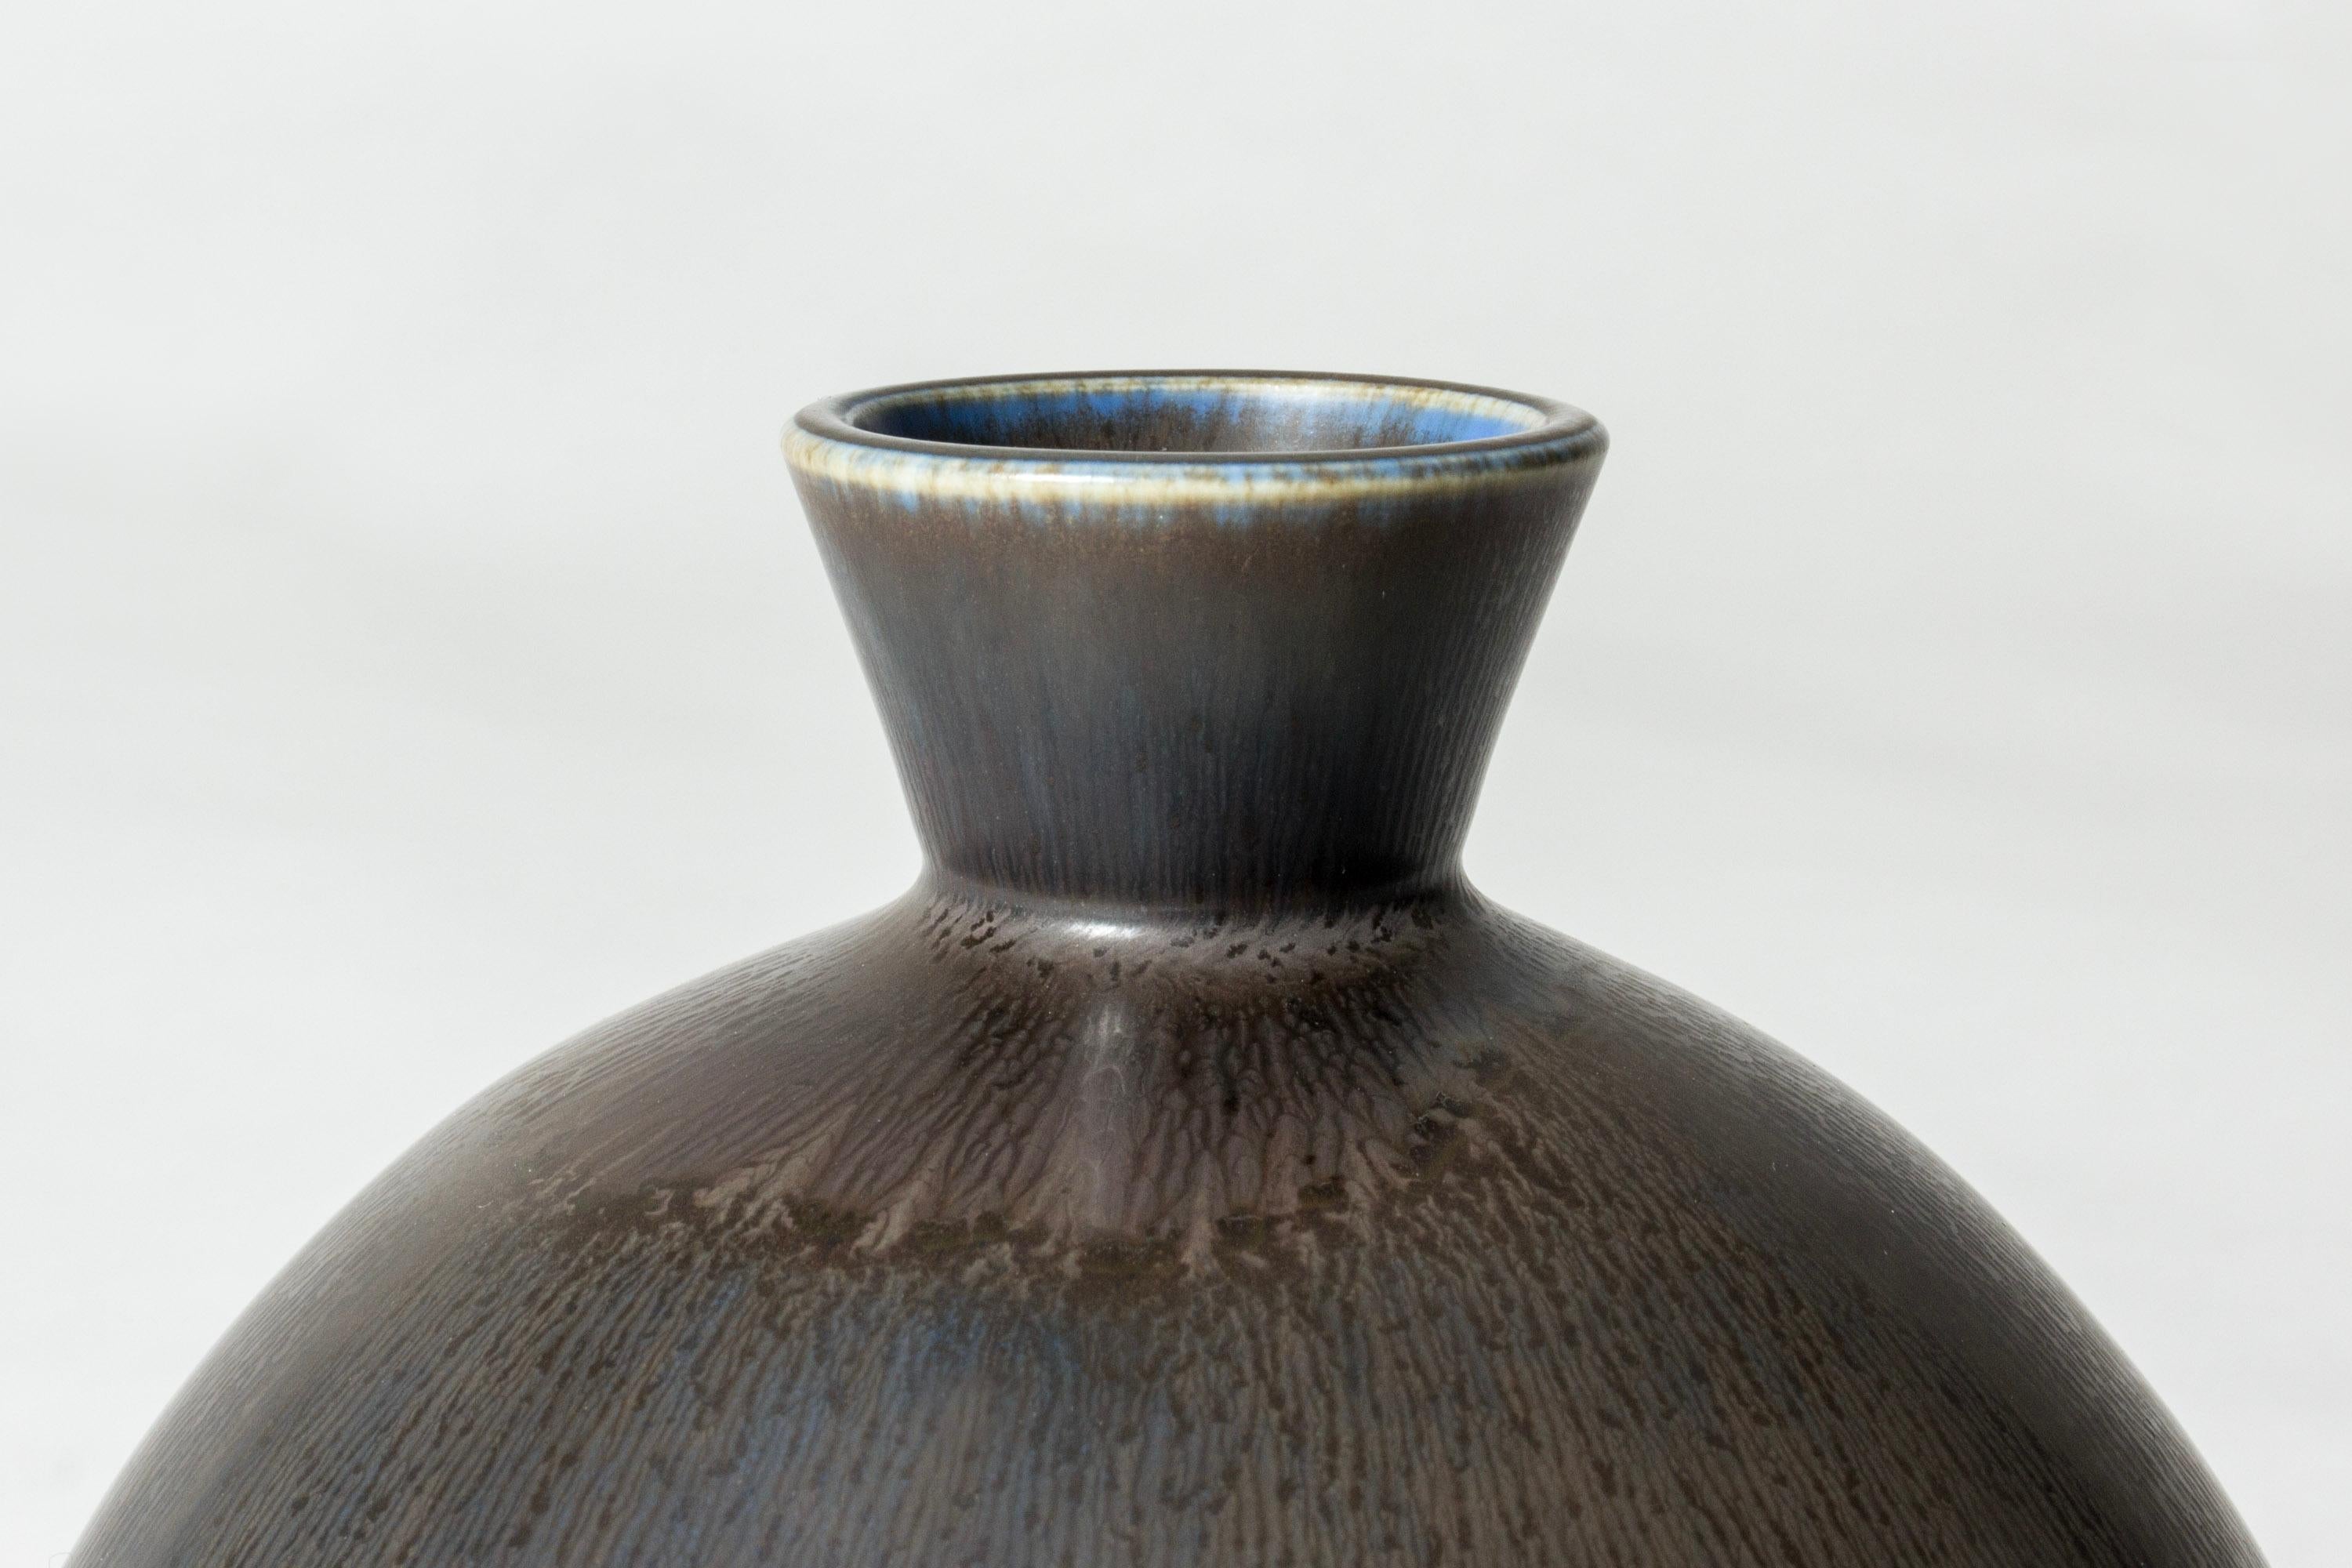 Plump, round stoneware vase by Berndt Friberg, with a compact neck. Brownish grey hare’s fur glaze with blue at the base and rim.

Berndt Friberg was a Swedish ceramicist, renowned for his stoneware vases and vessels for Gustavsberg. His pure,